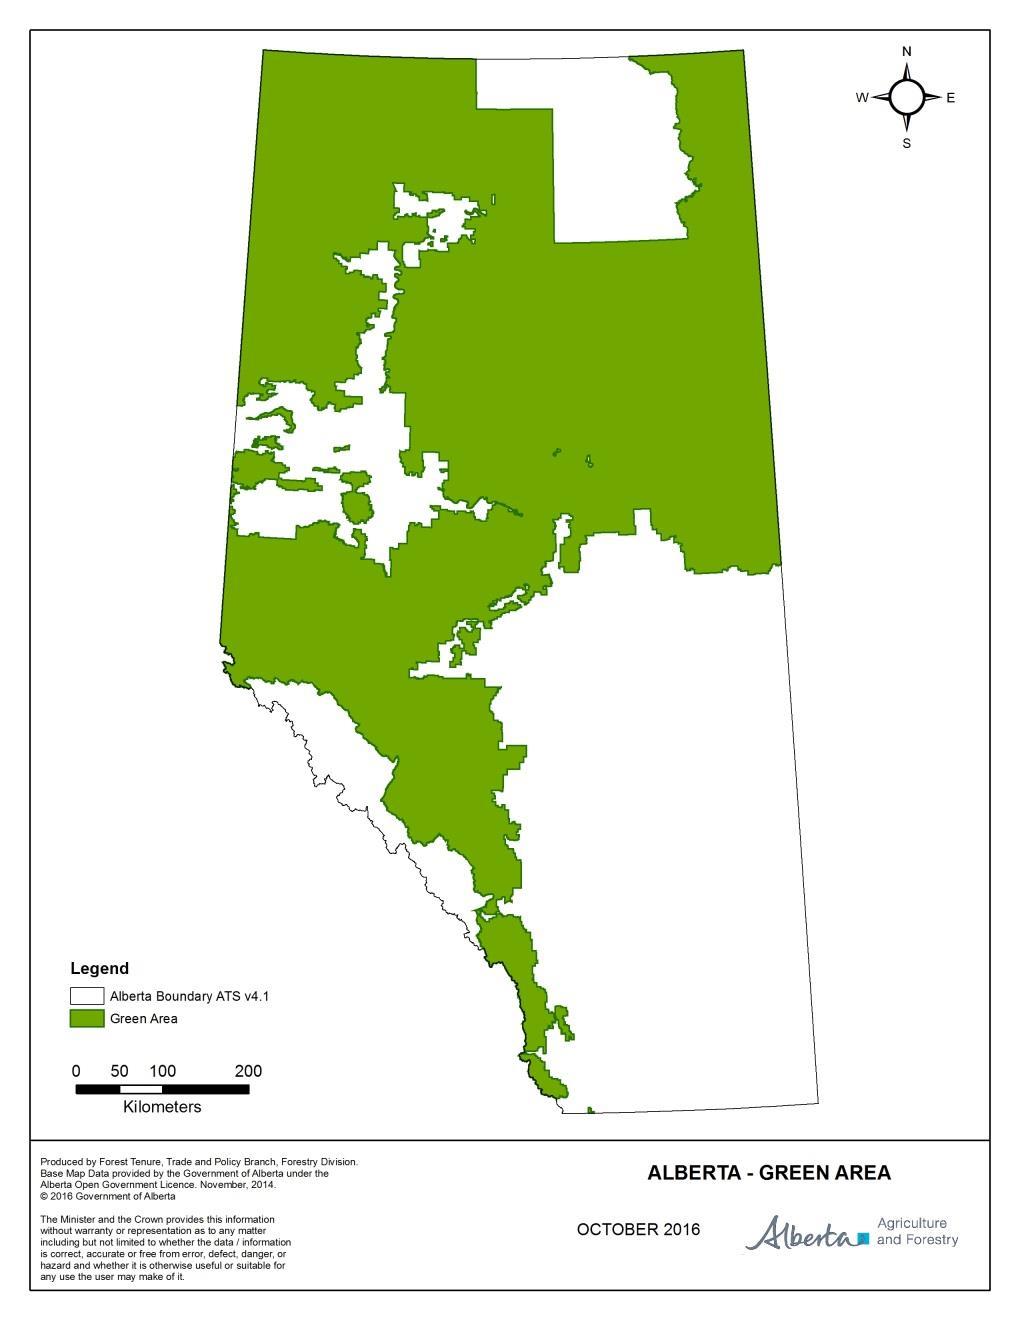 Alberta forestry commercial Context Alberta s forest sector Large & sustainable fibre supplies Mandatory reforestation 3 rd largest manufacturing